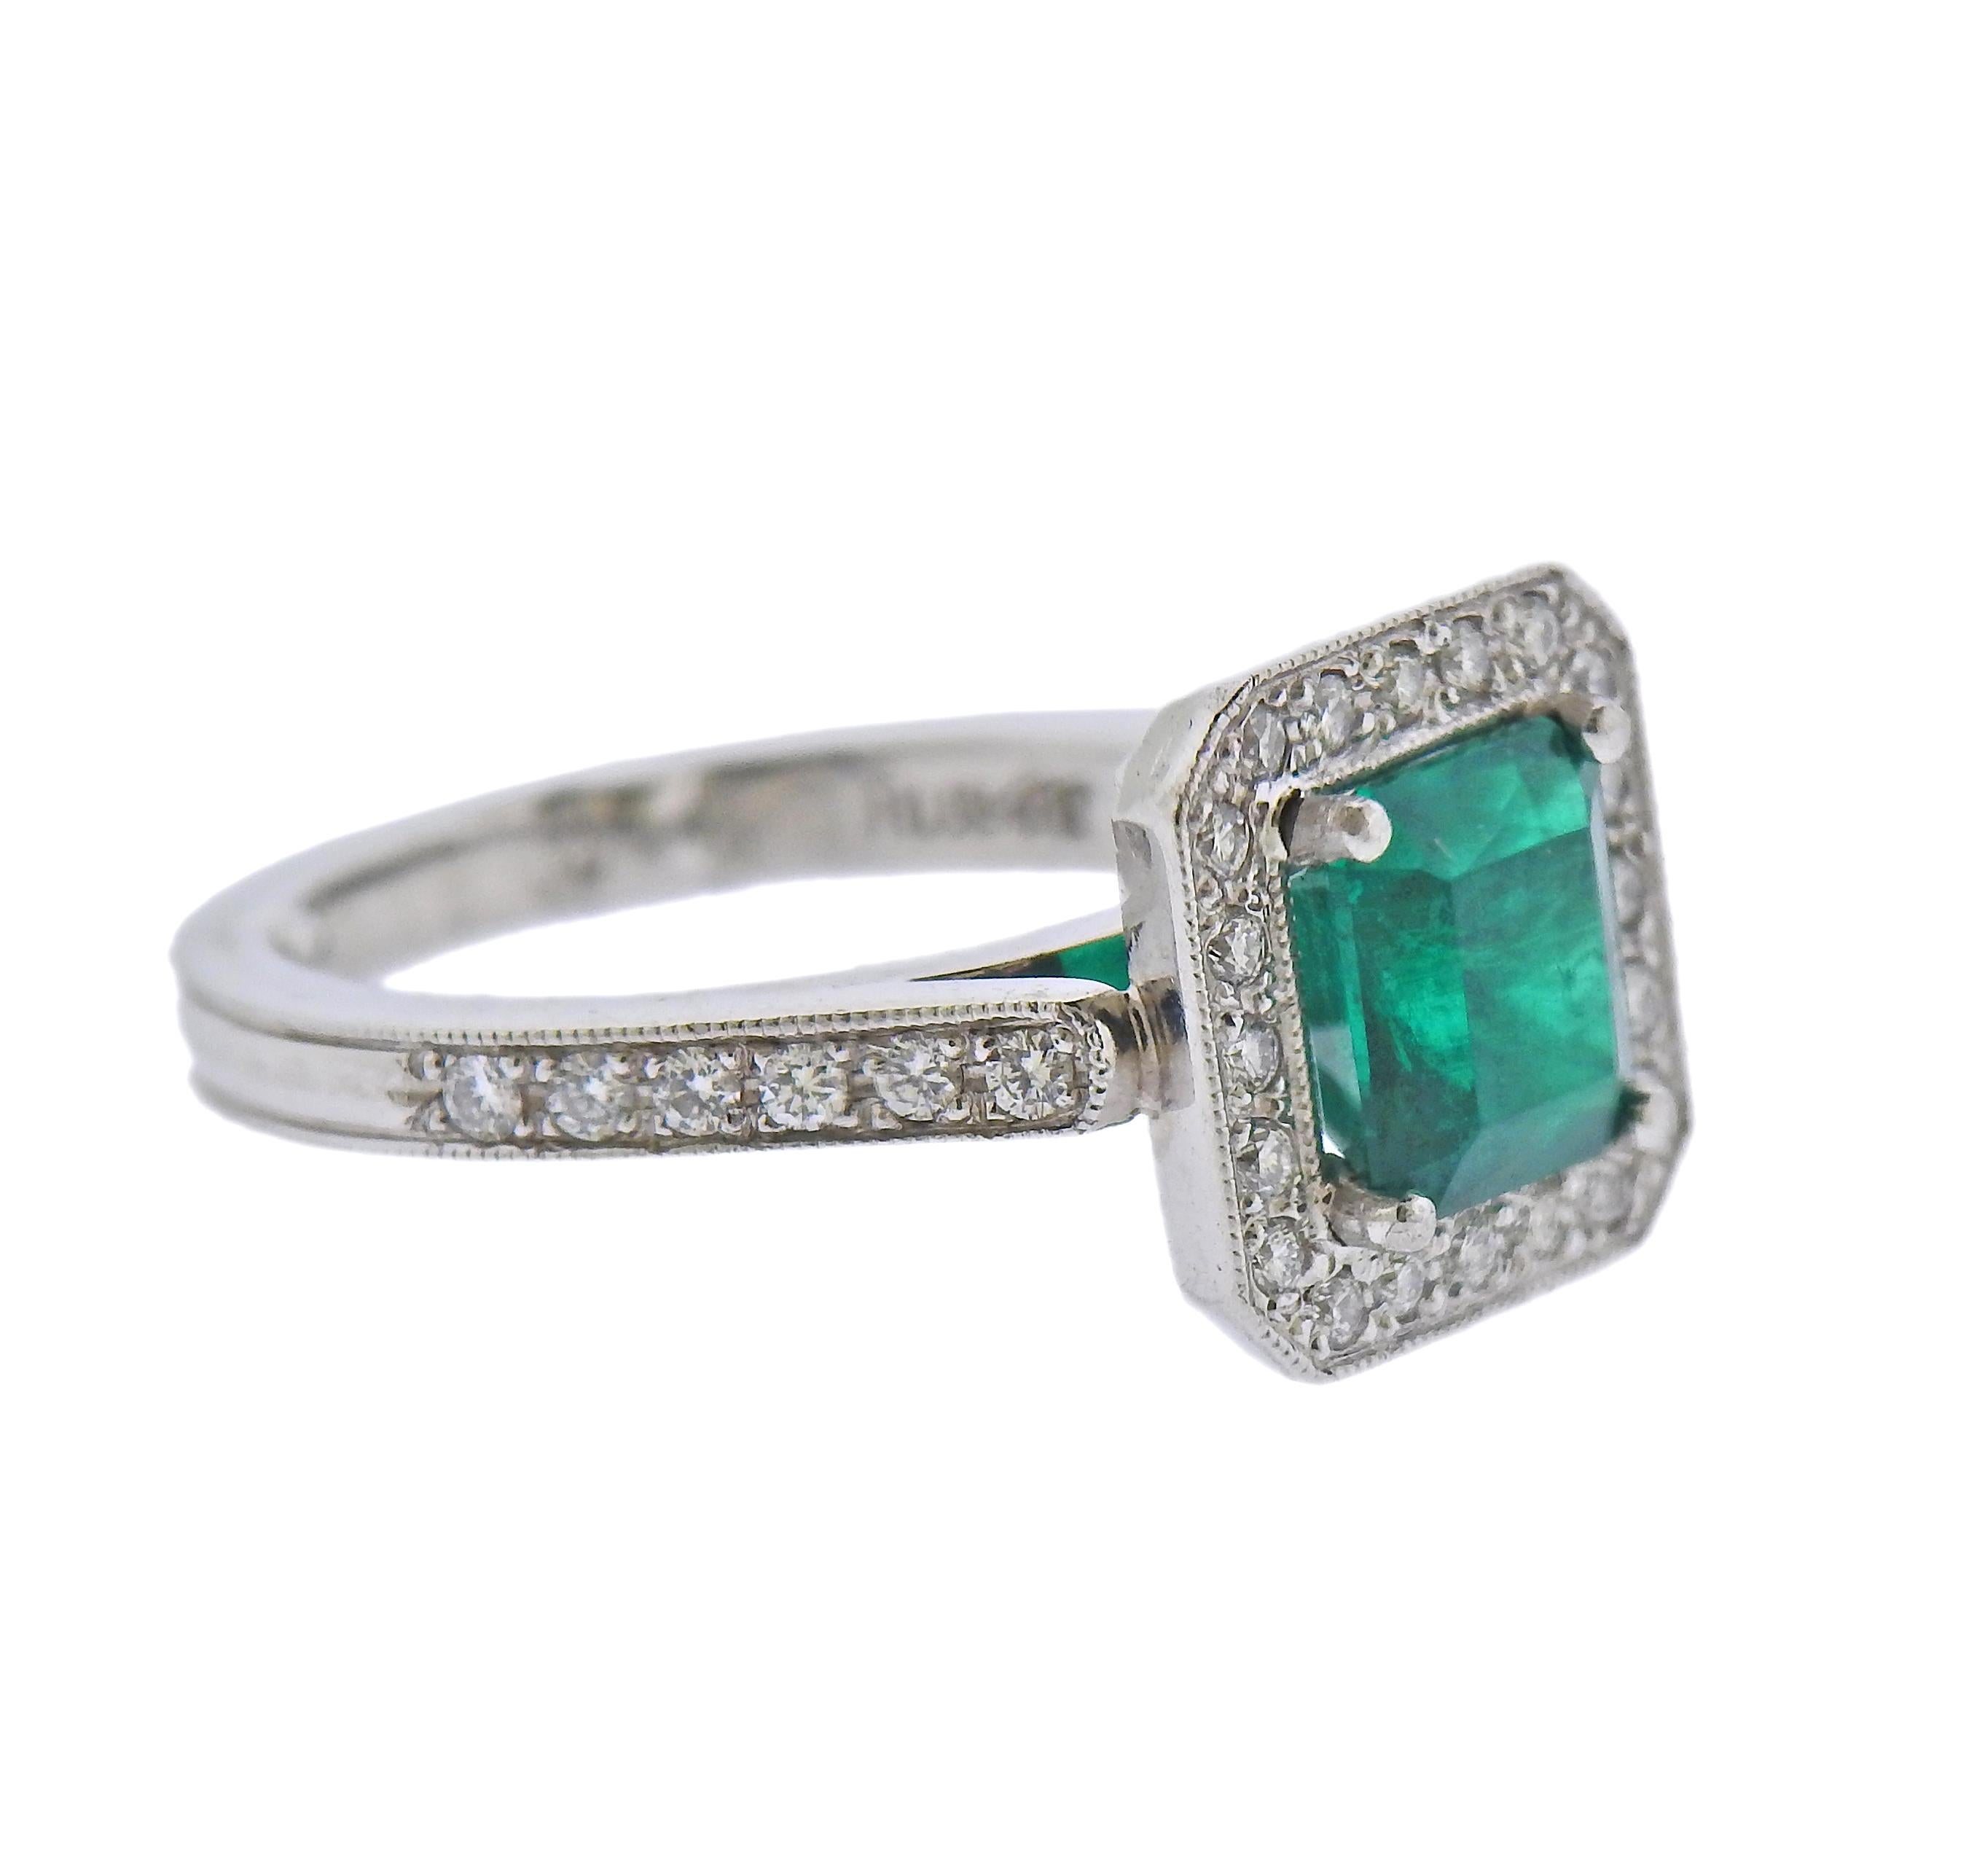 Platinum ring, with an approx. 1.66ct emerald (measuring 7.7 x 7.2 x 4.7mm) surrounded with diamonds. Ring size - 6.5, ring top - 13mm x 13mm. Marked: Flush-AT, 850 Plat. Weight - 10.3 grams. 